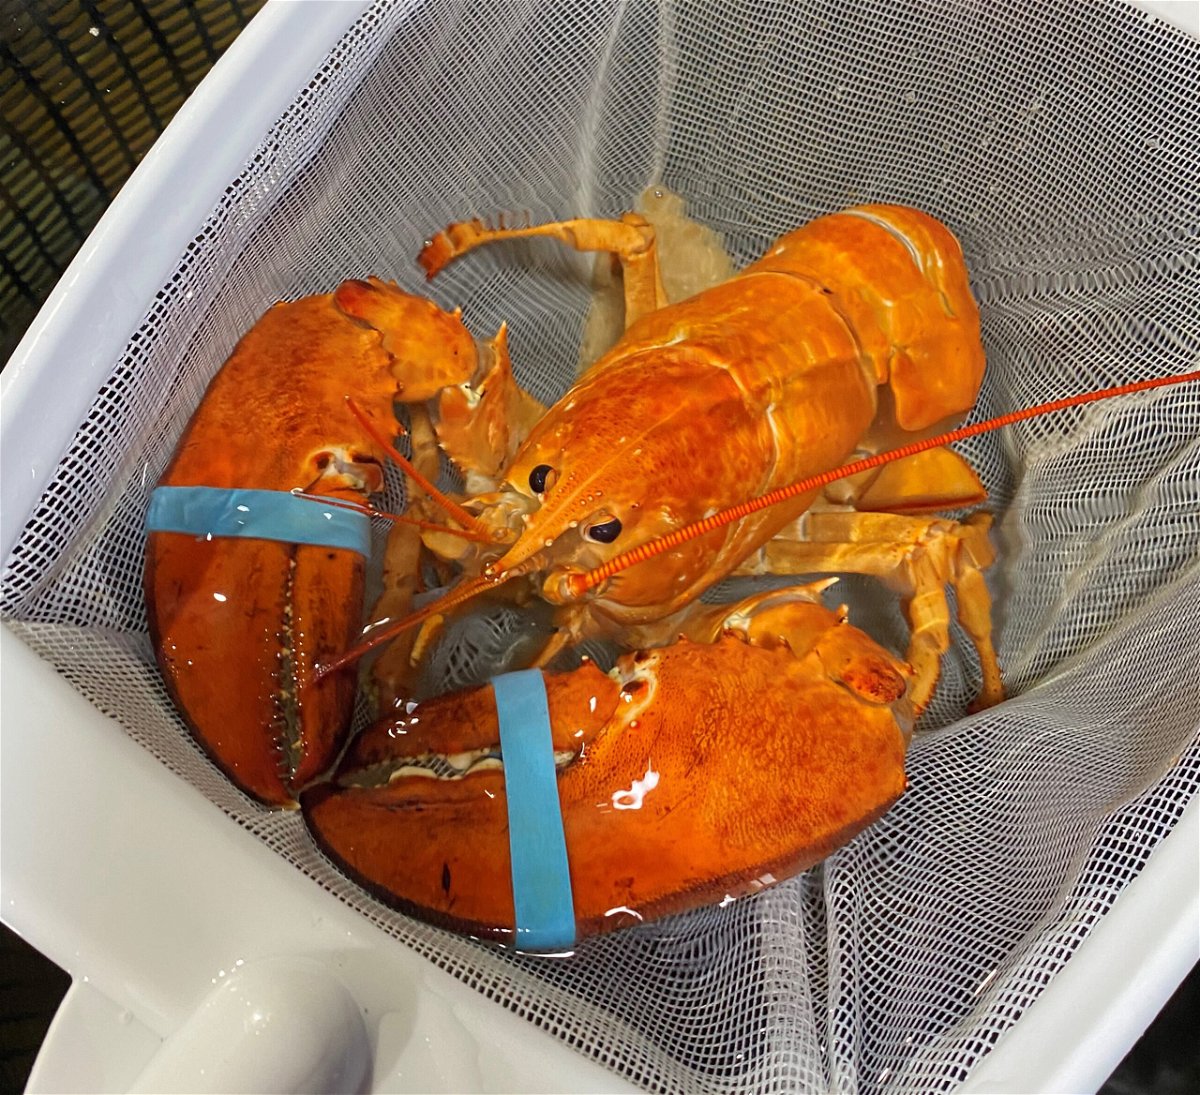 <i>Red Lobster</i><br/>An extremely rare orange lobster found in a shipment to a Red Lobster restaurant has found a new home at Ripley's Aquarium.